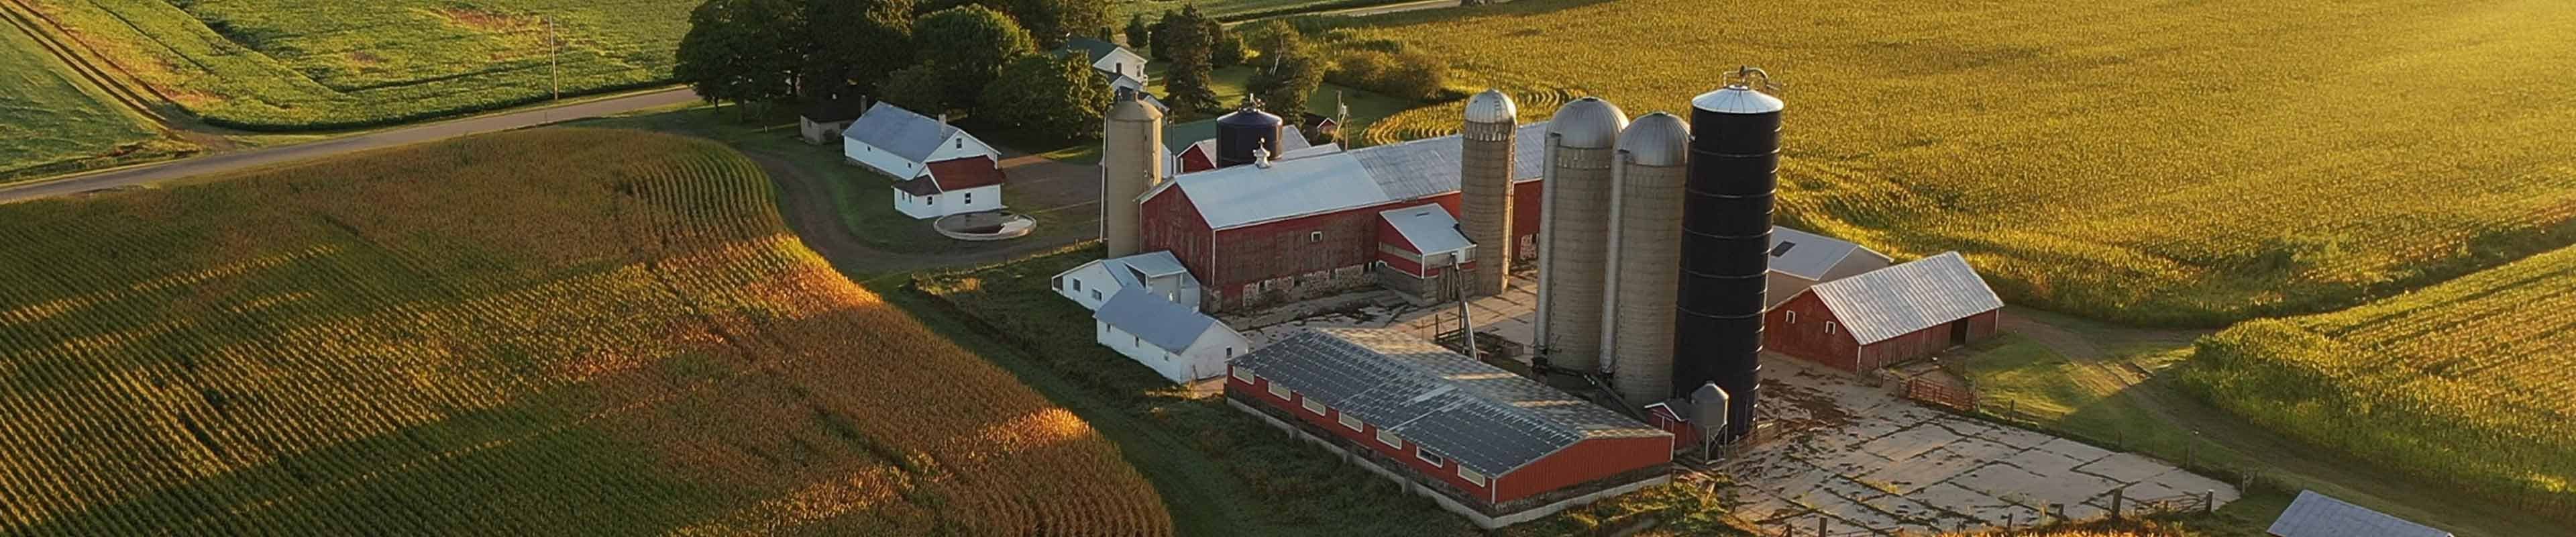 Image of an aerial view of a modern American farm during harvest season.